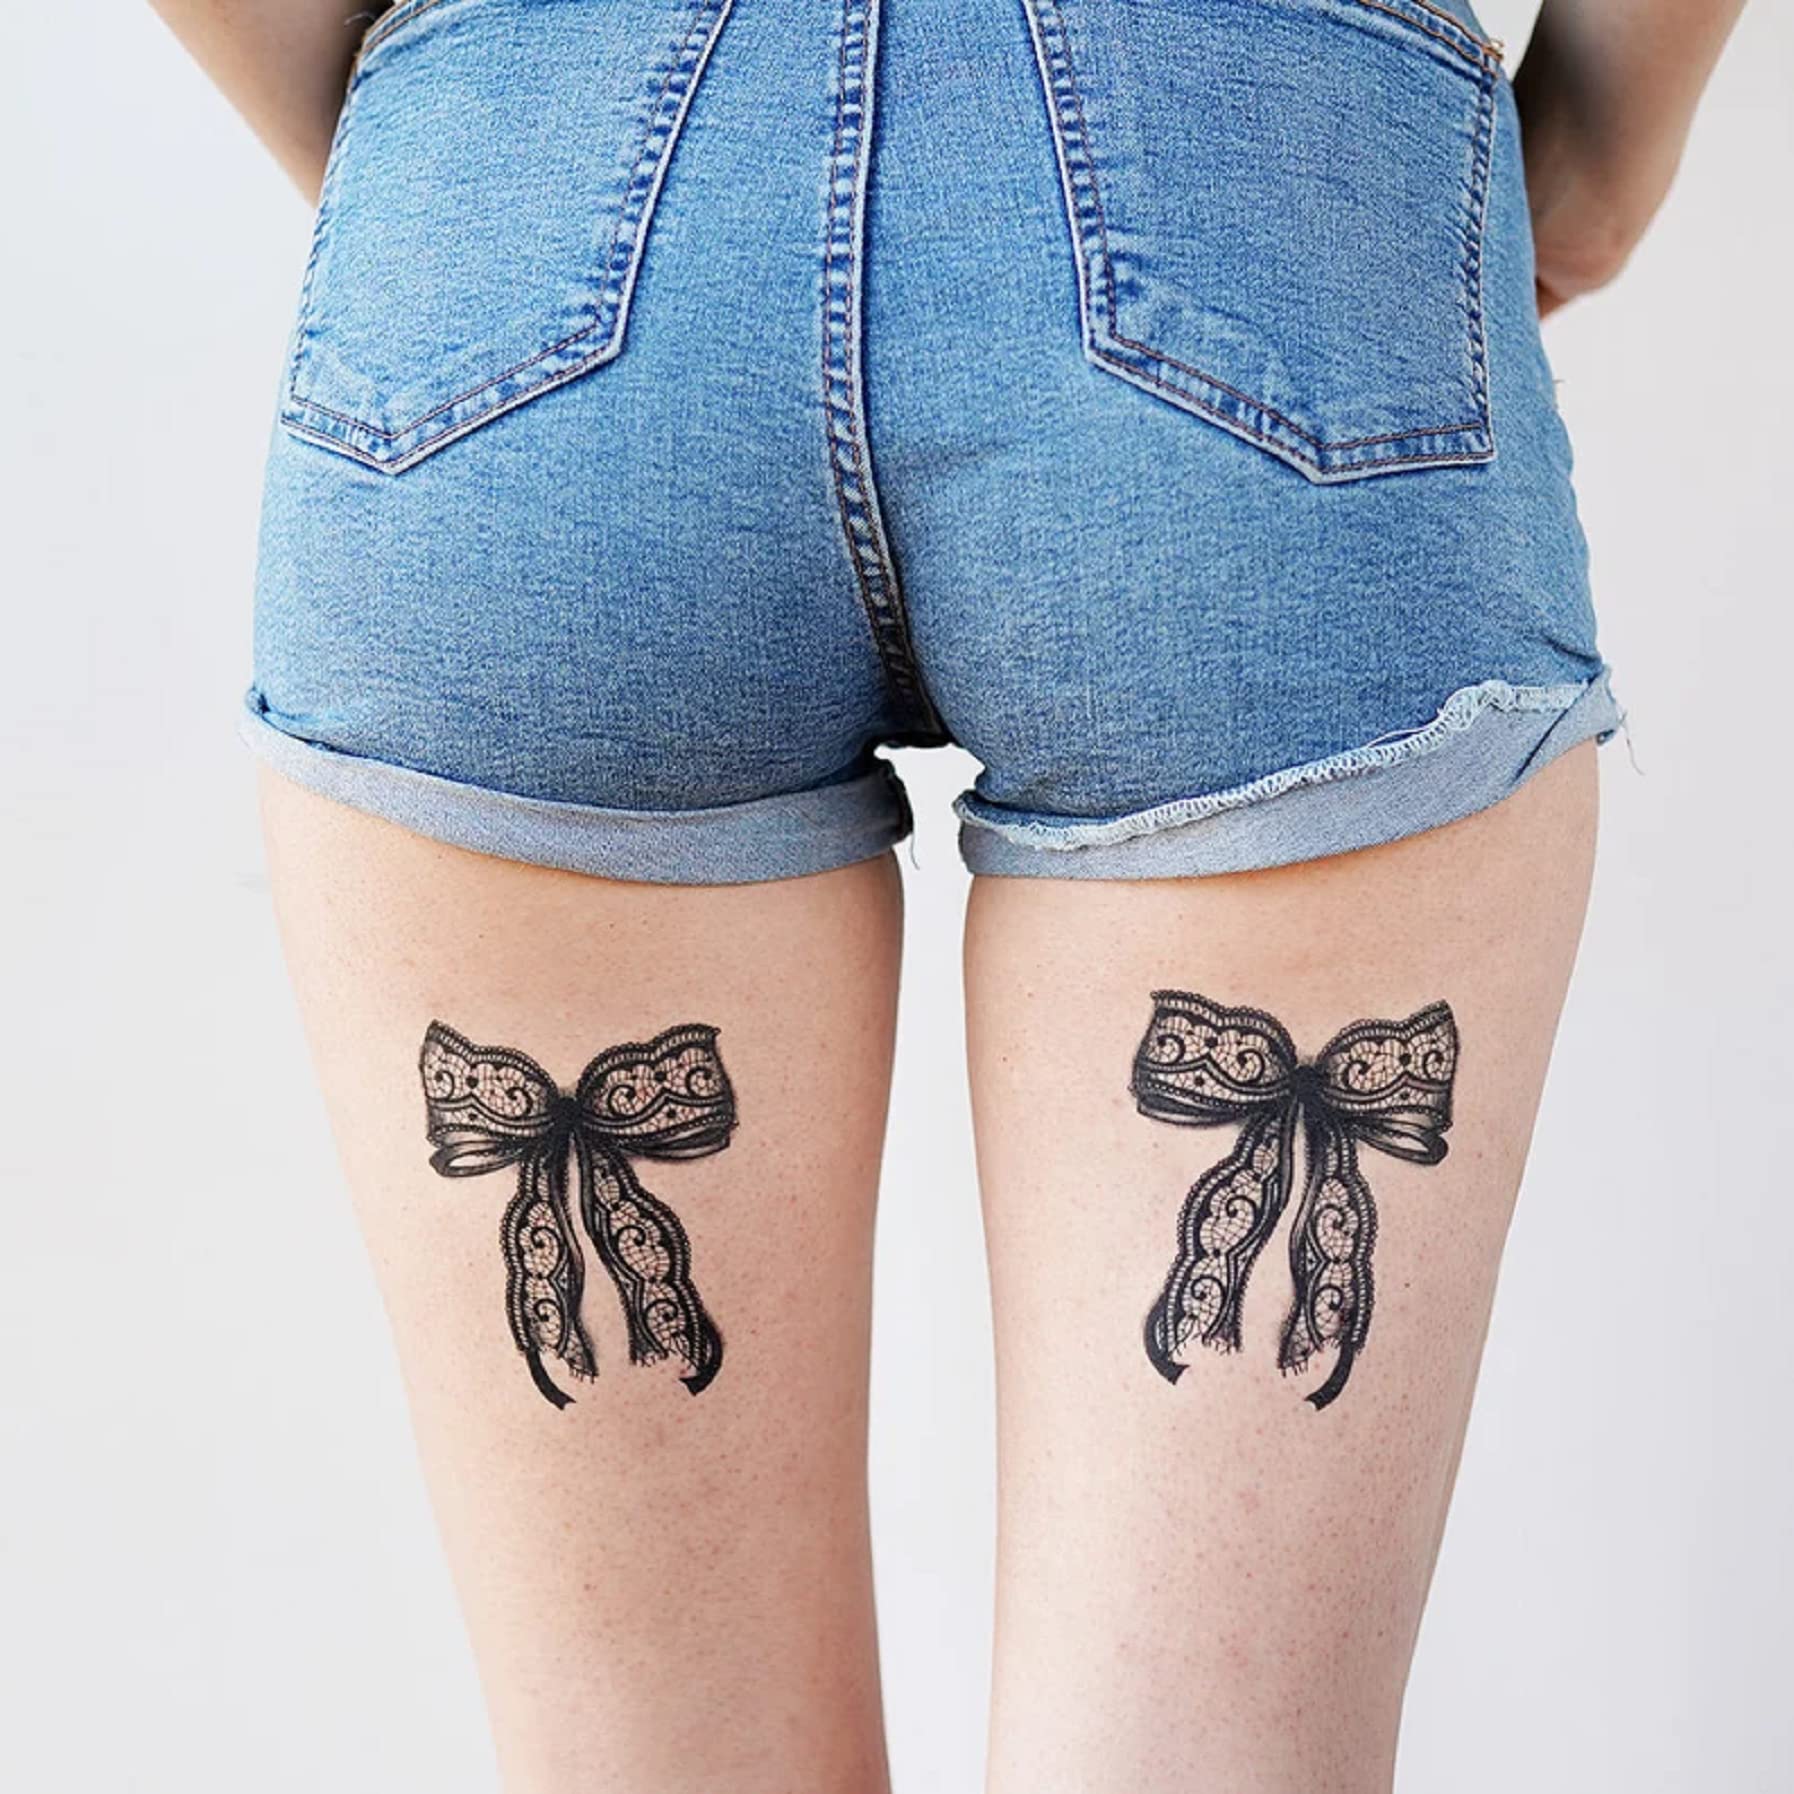 Amazon.com : Lace Bow, Lace Bow Tie Tattoo, Sexy Tattoo, Feminine Tattoo,  Beach Tattoo, Bow Tie Leg Tattoo, Thigh Tattoo, Seductive Tattoo, (Set of  2) : Beauty & Personal Care